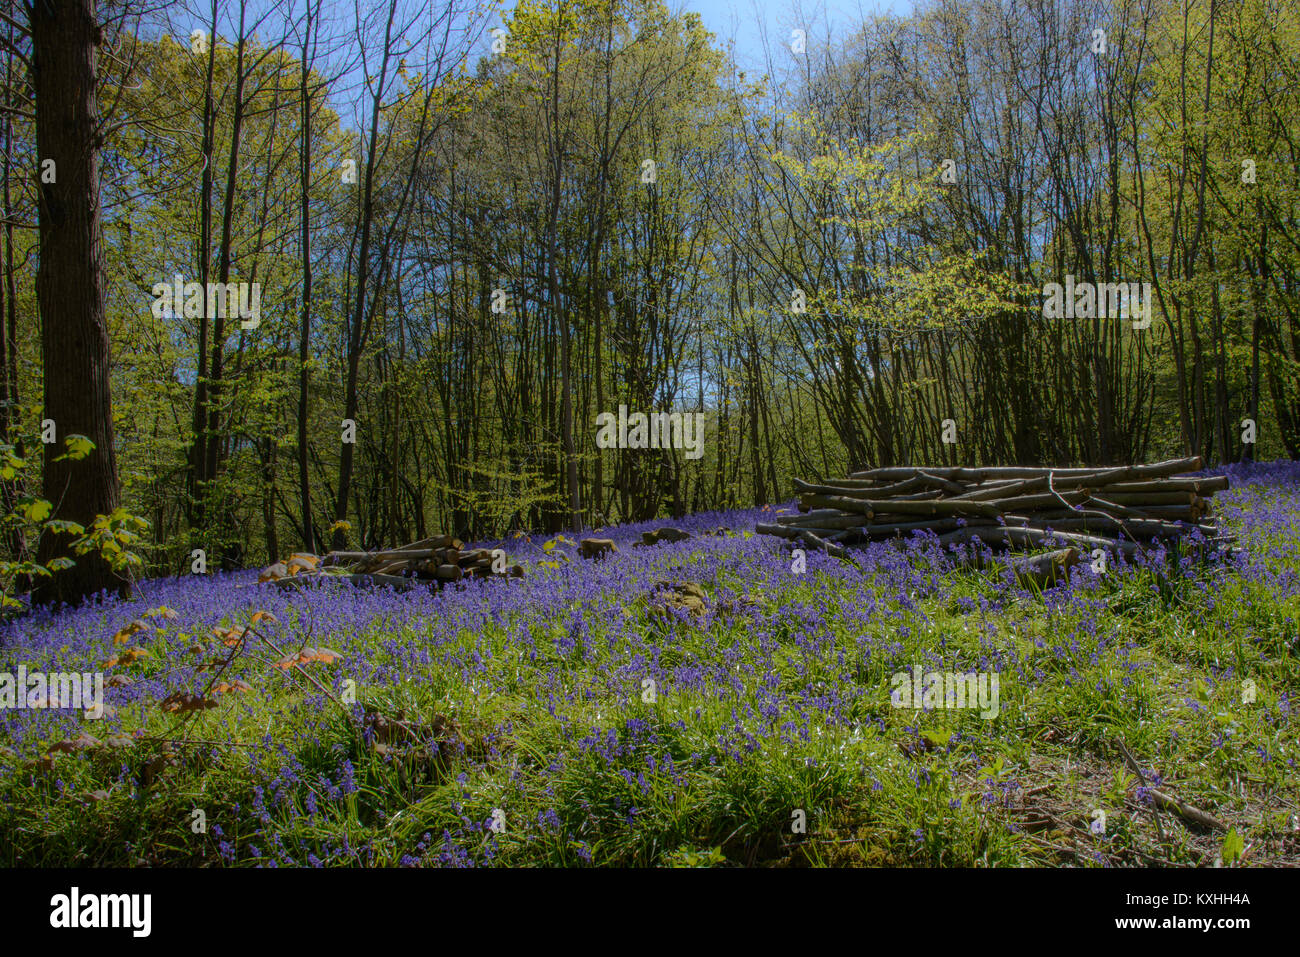 Bluebells transform our woodland in springtime. The carpet of intense blue under the opening tree canopy is one of our greatest woodland spectacles. Stock Photo